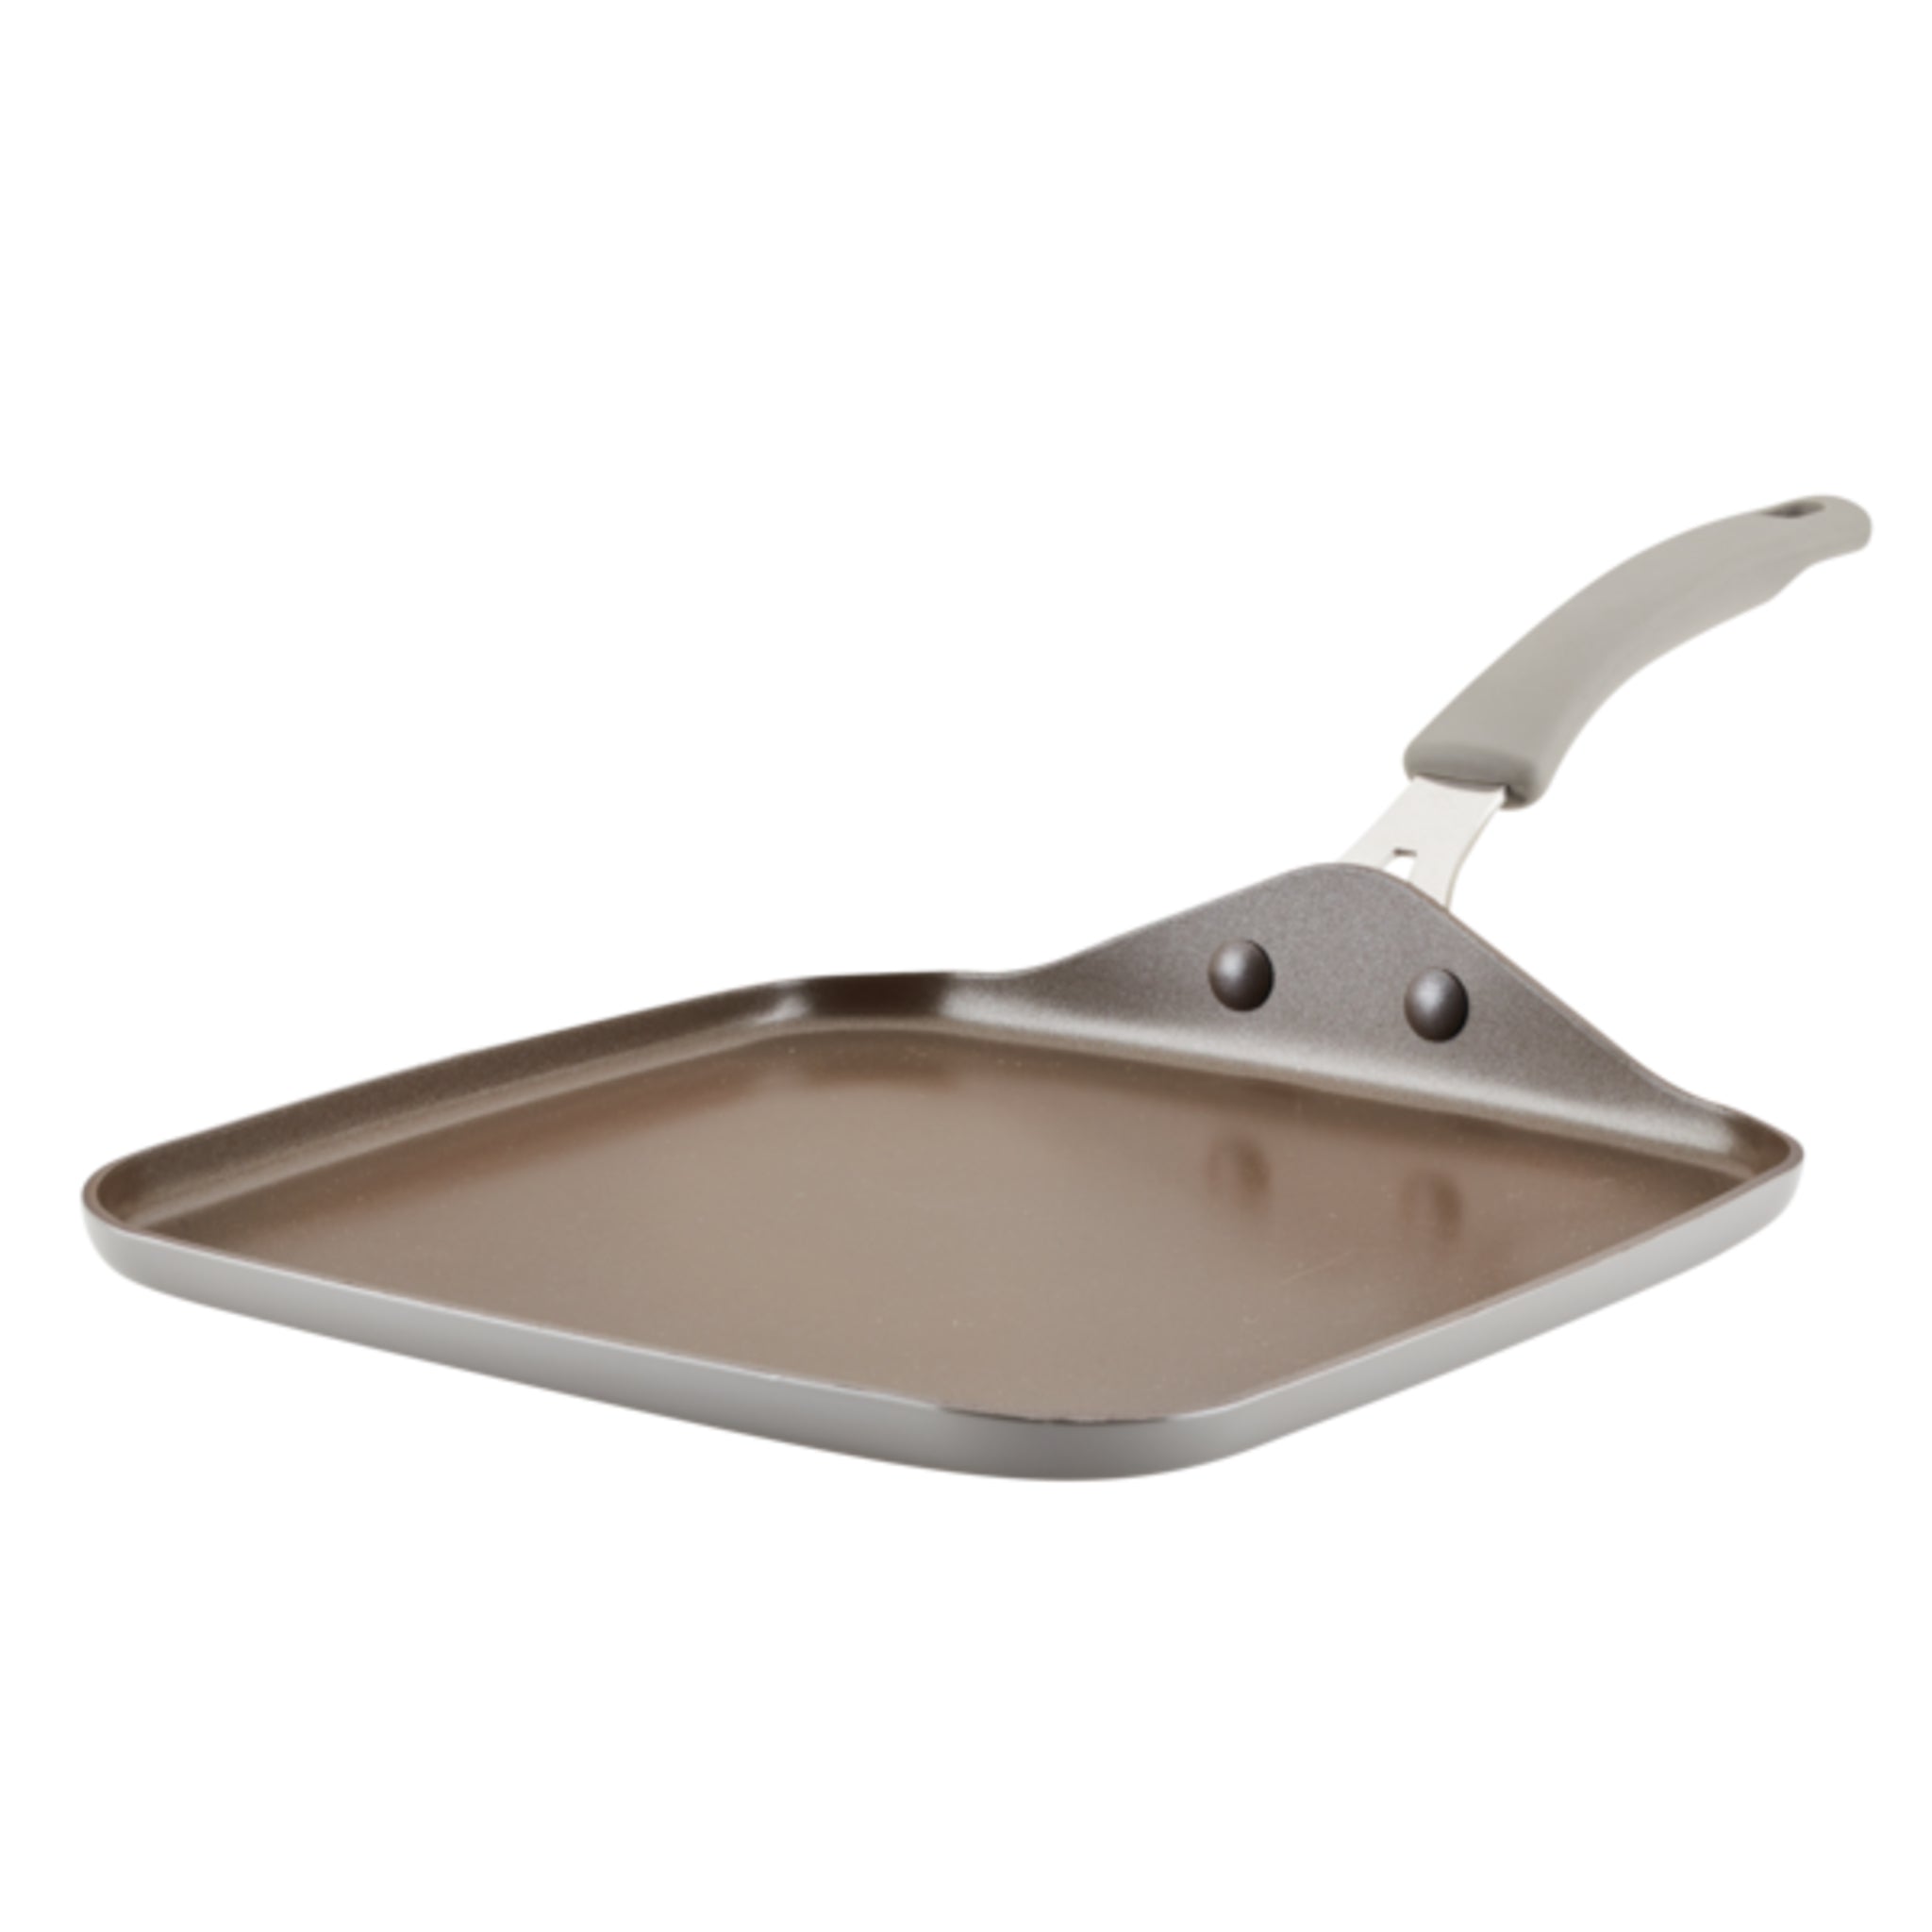 11-Inch Cook + Create Nonstick Square Griddle Pan